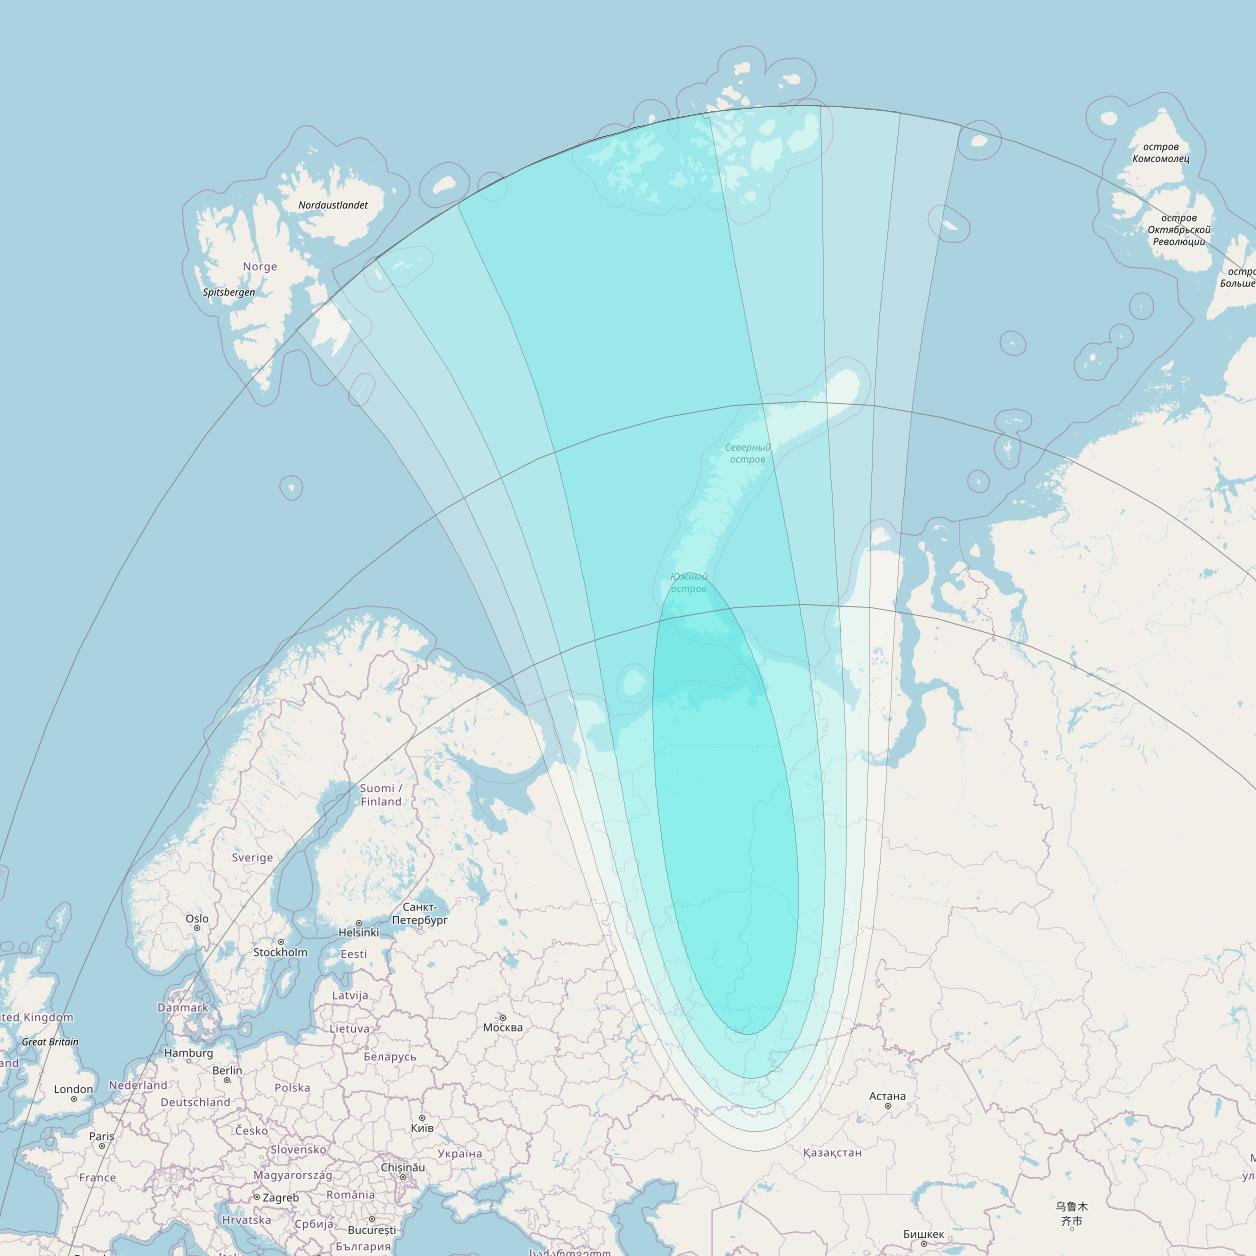 Inmarsat-4F2 at 64° E downlink L-band S096 User Spot beam coverage map